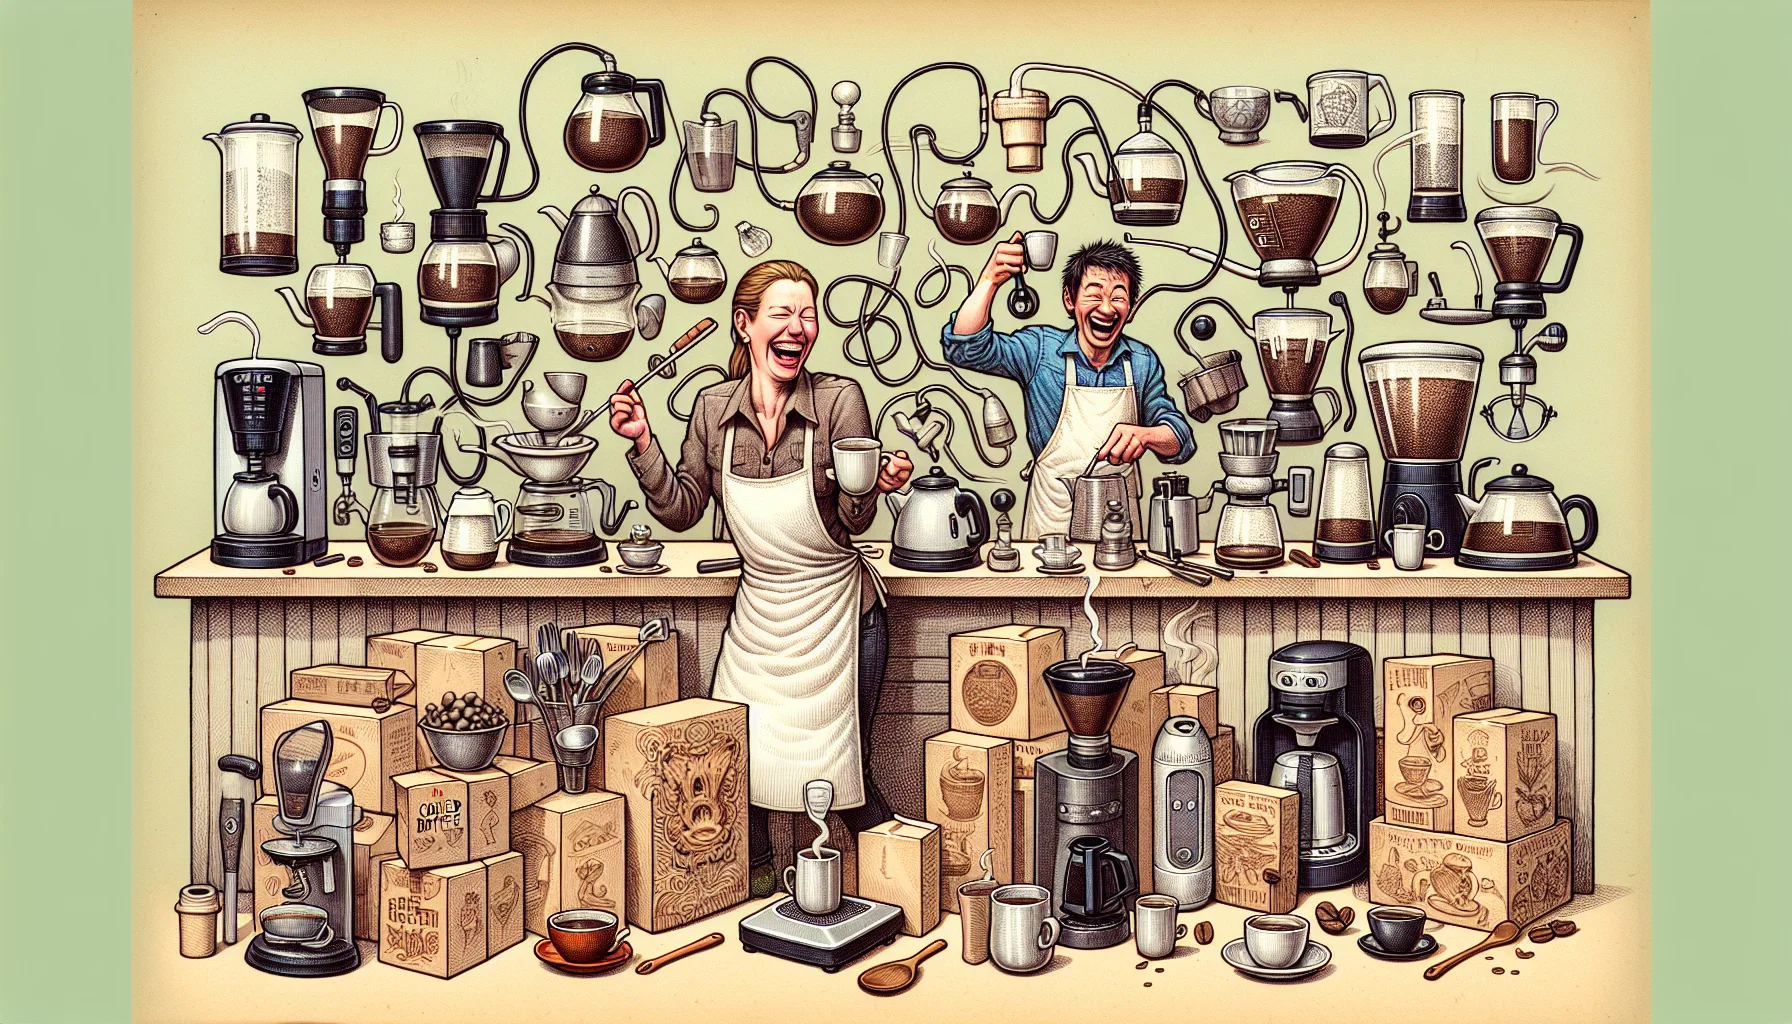 Draw a humorous and realistic scenario featuring countless ways of brewing coffee and tea. Visible should be a diverse array of traditional and innovative brewing methods, such as teapots, coffee makers, cold brew systems, and even some fantastical inventions. Thrown in the midst of this brewing madness, have a Caucasian woman in a barista apron, laughing while pouring a tea kettle into a mug, and a South Asian man who is unsure about how to use a uniquely designed coffee brewing device. Integrate packaging for a variety of fanciful tea and coffee brands on the shelves, tables, and counters.